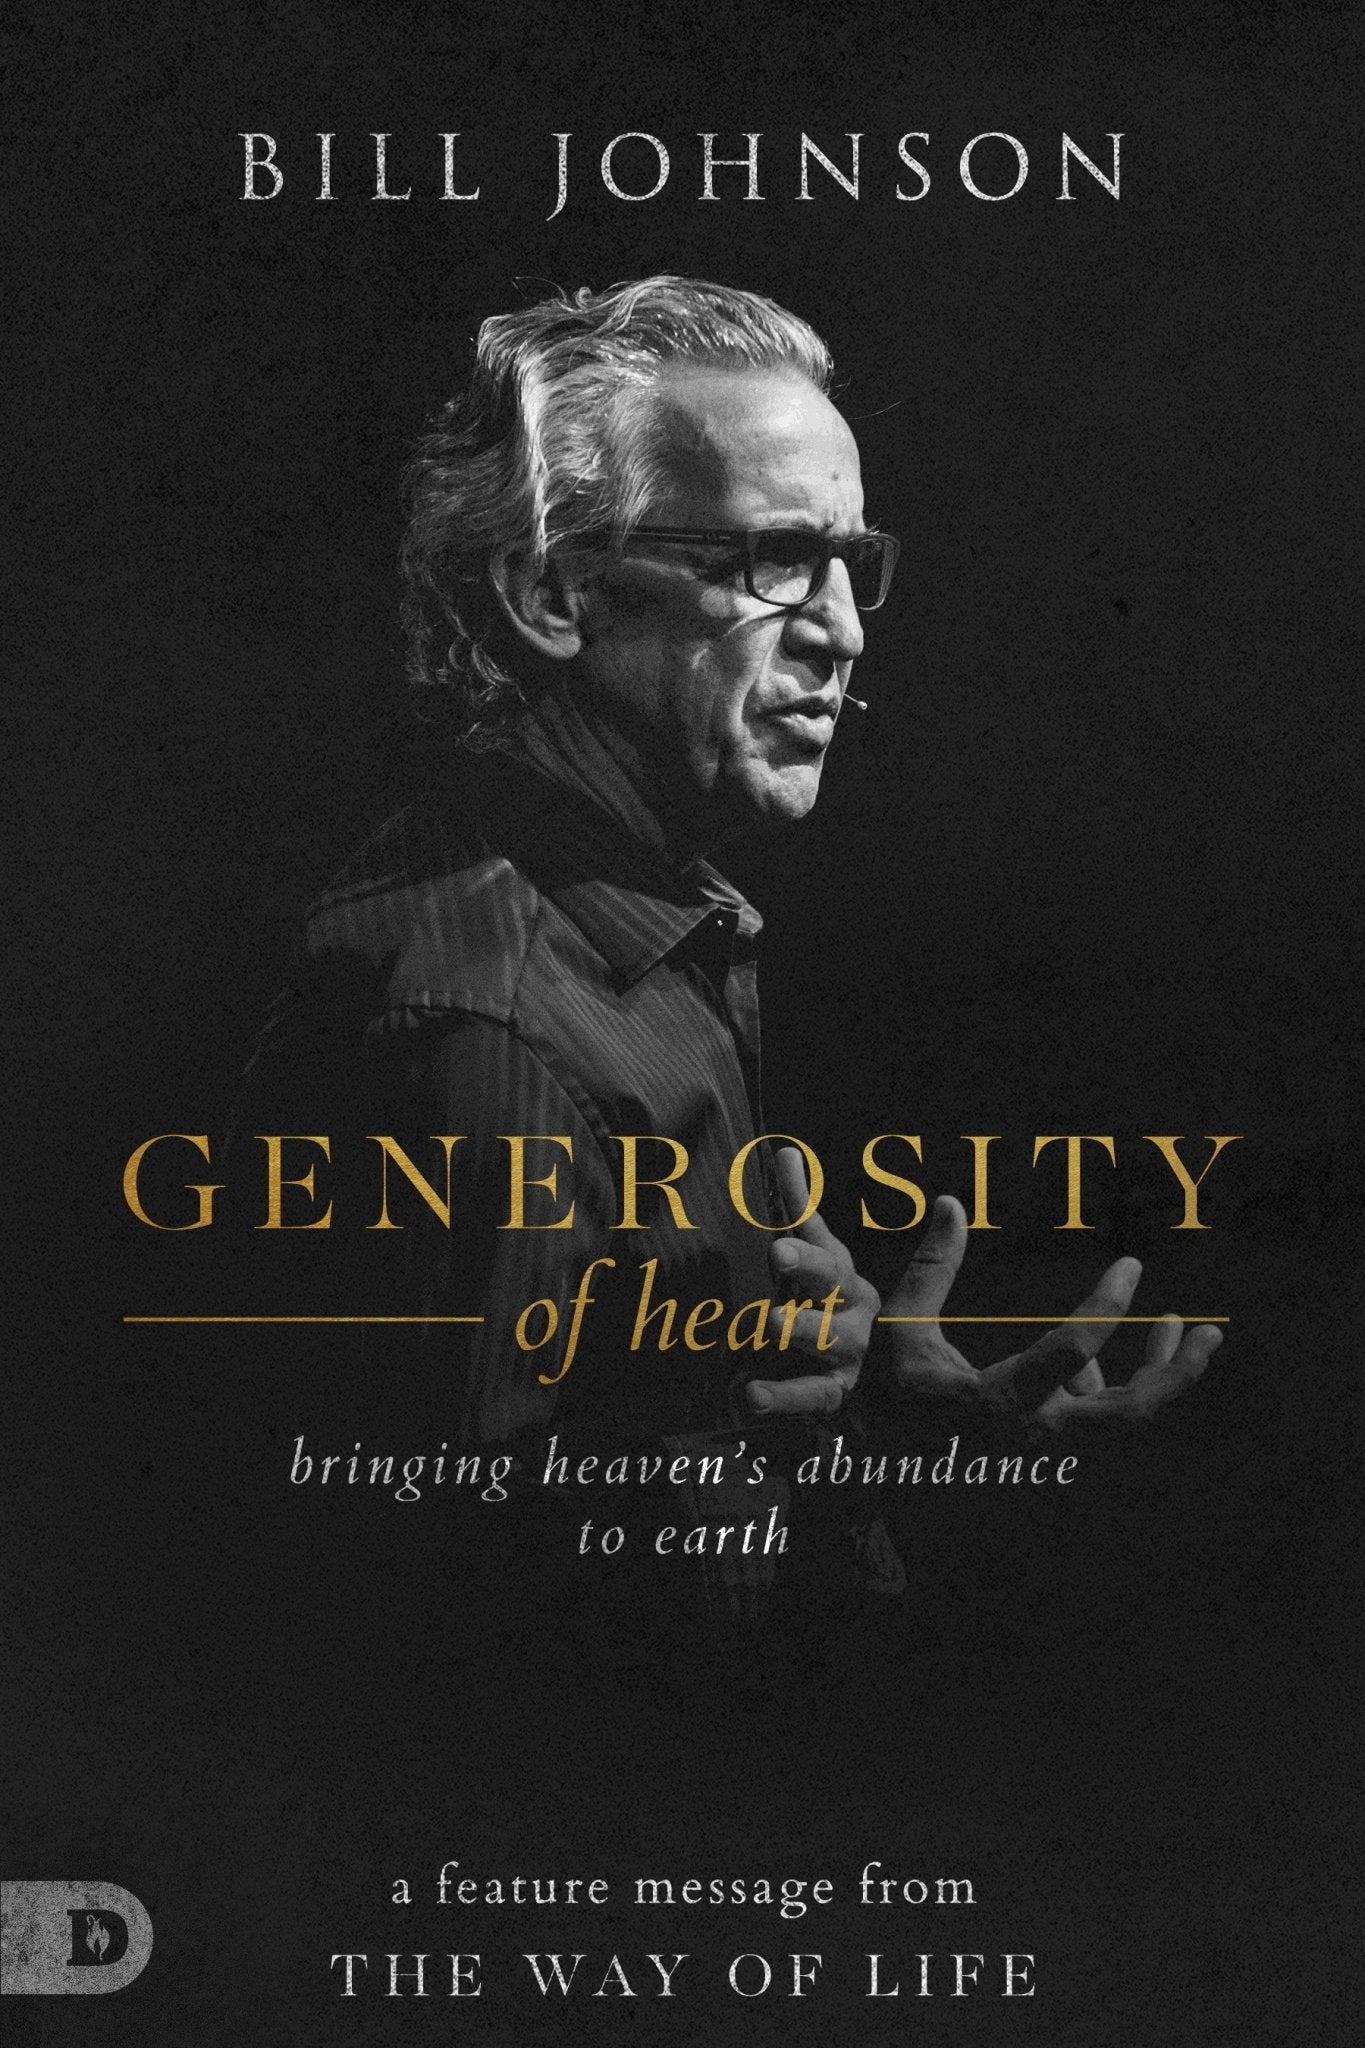 The Generosity of Heart: Way of Life Free Feature Message (Digital Download)